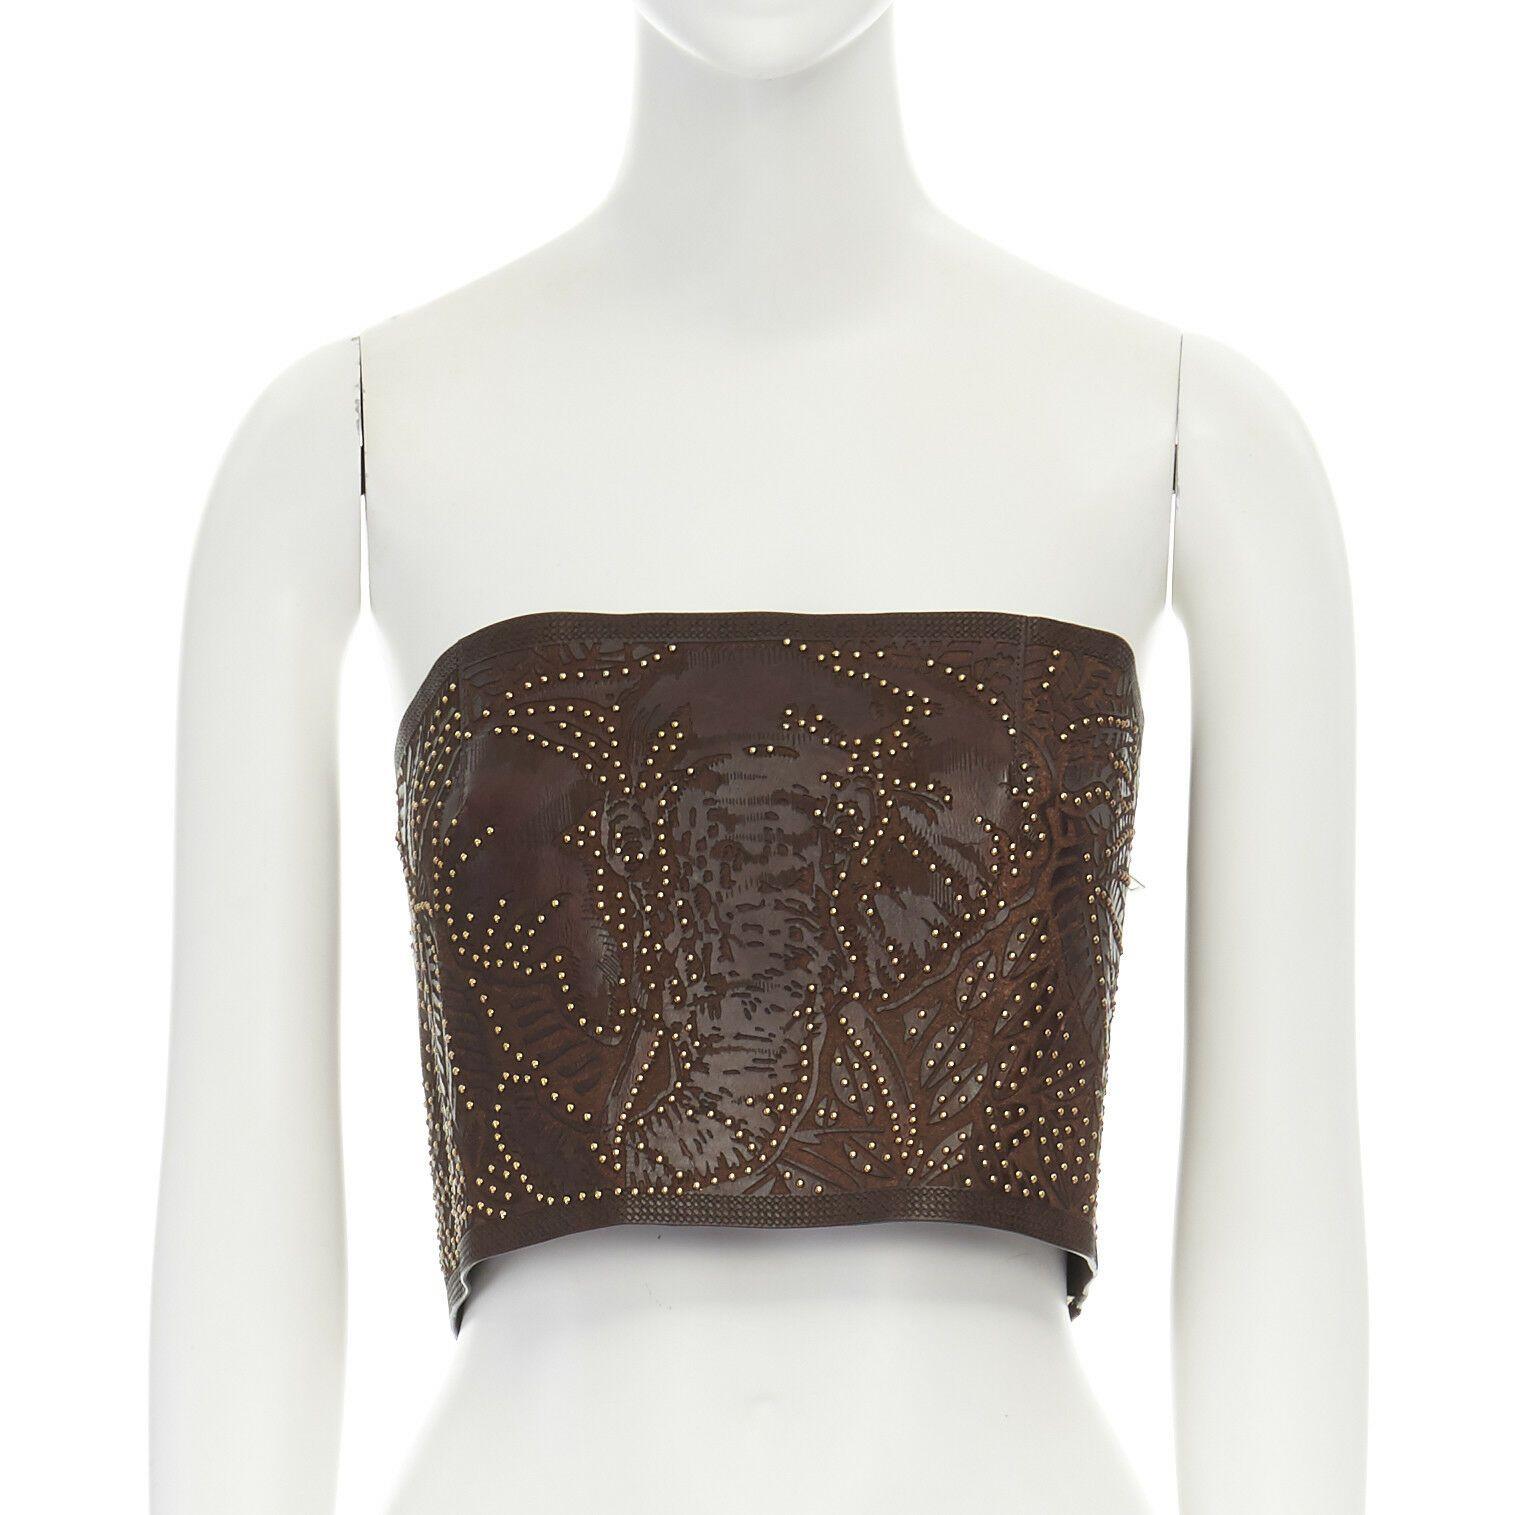 runway VALENTINO SS16 ethnic brown laser cut leather gold studded corset top S
VALENTINO
FROM THE SPRING SUMMER 2016 RUNWAY
Ethnic leaf pattern. Brown etched leather. 
Faux python textured etching around edges. Bust dart for fit. 
Gold-tone micro